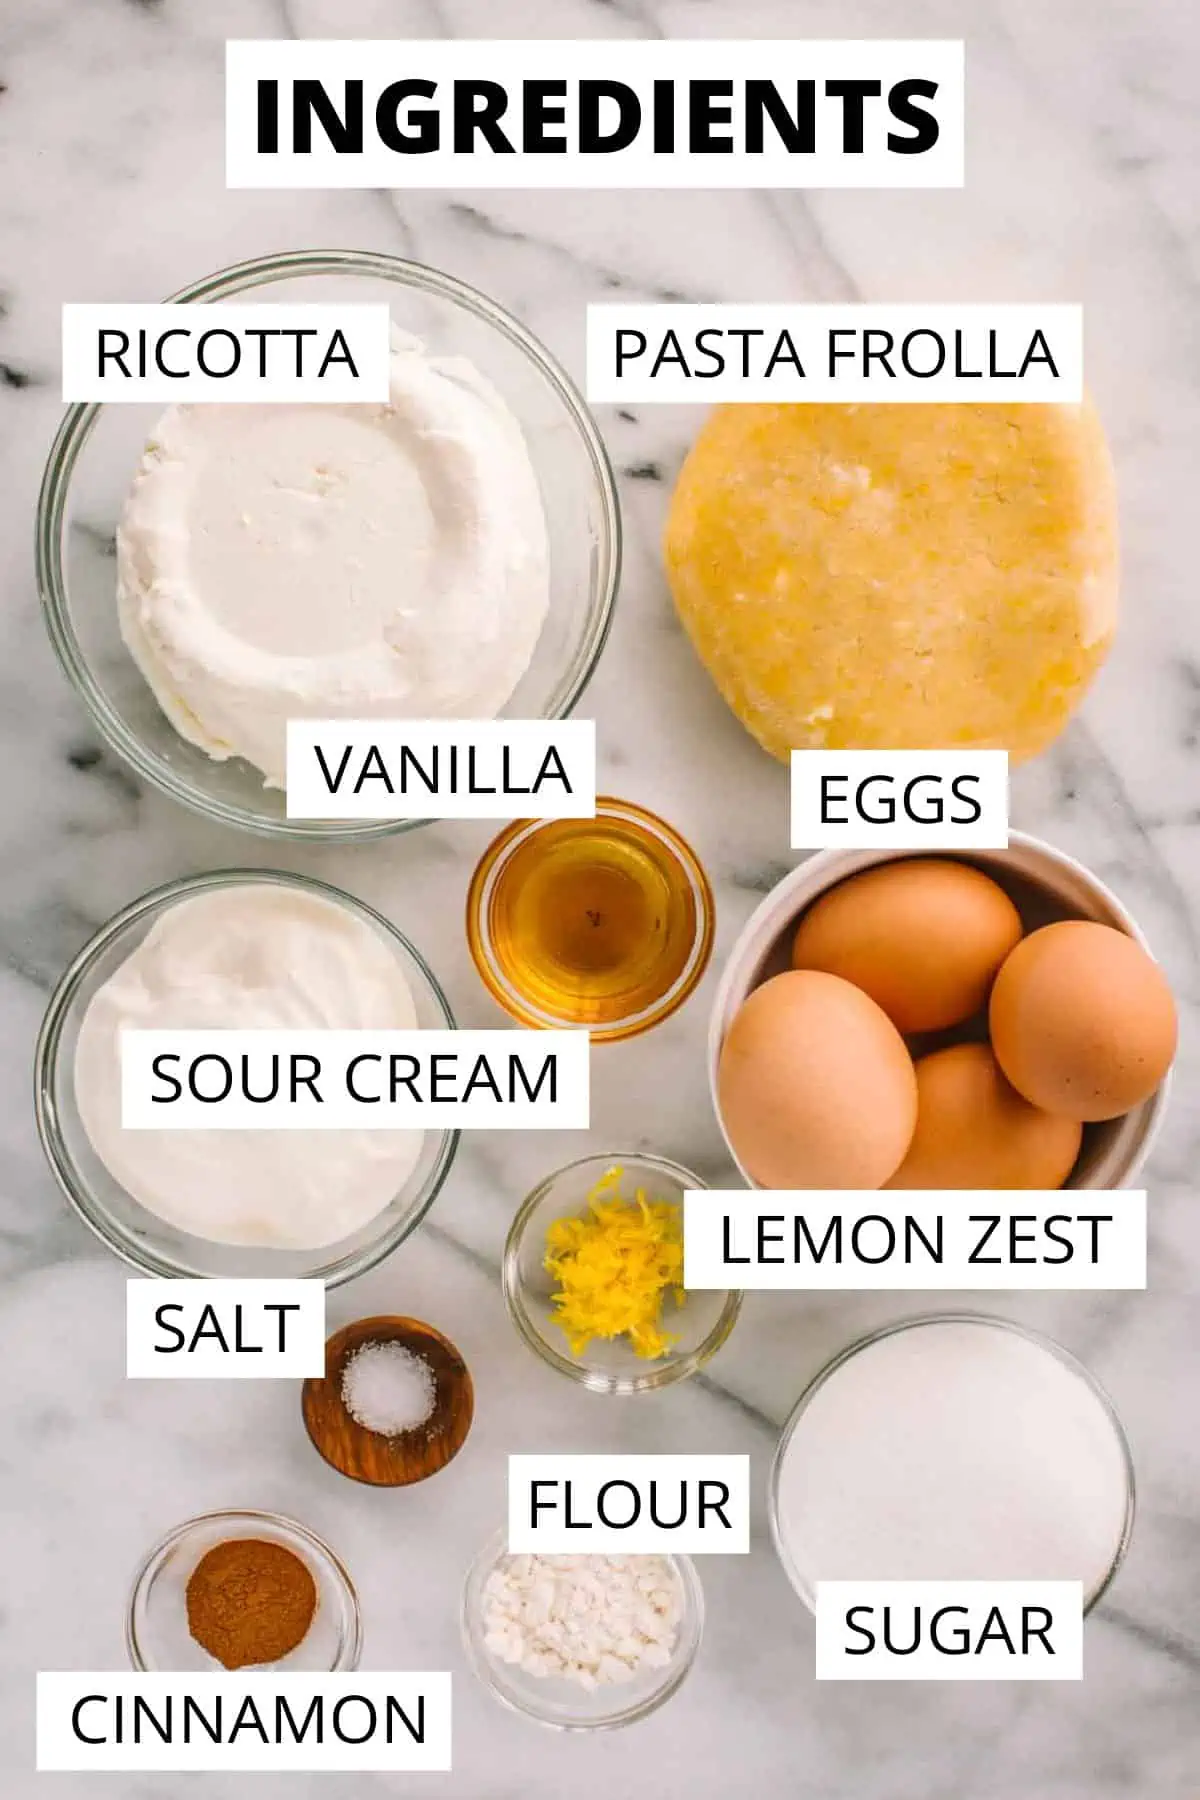 Recipe ingredients for ricotta pie portioned out in small bowls.